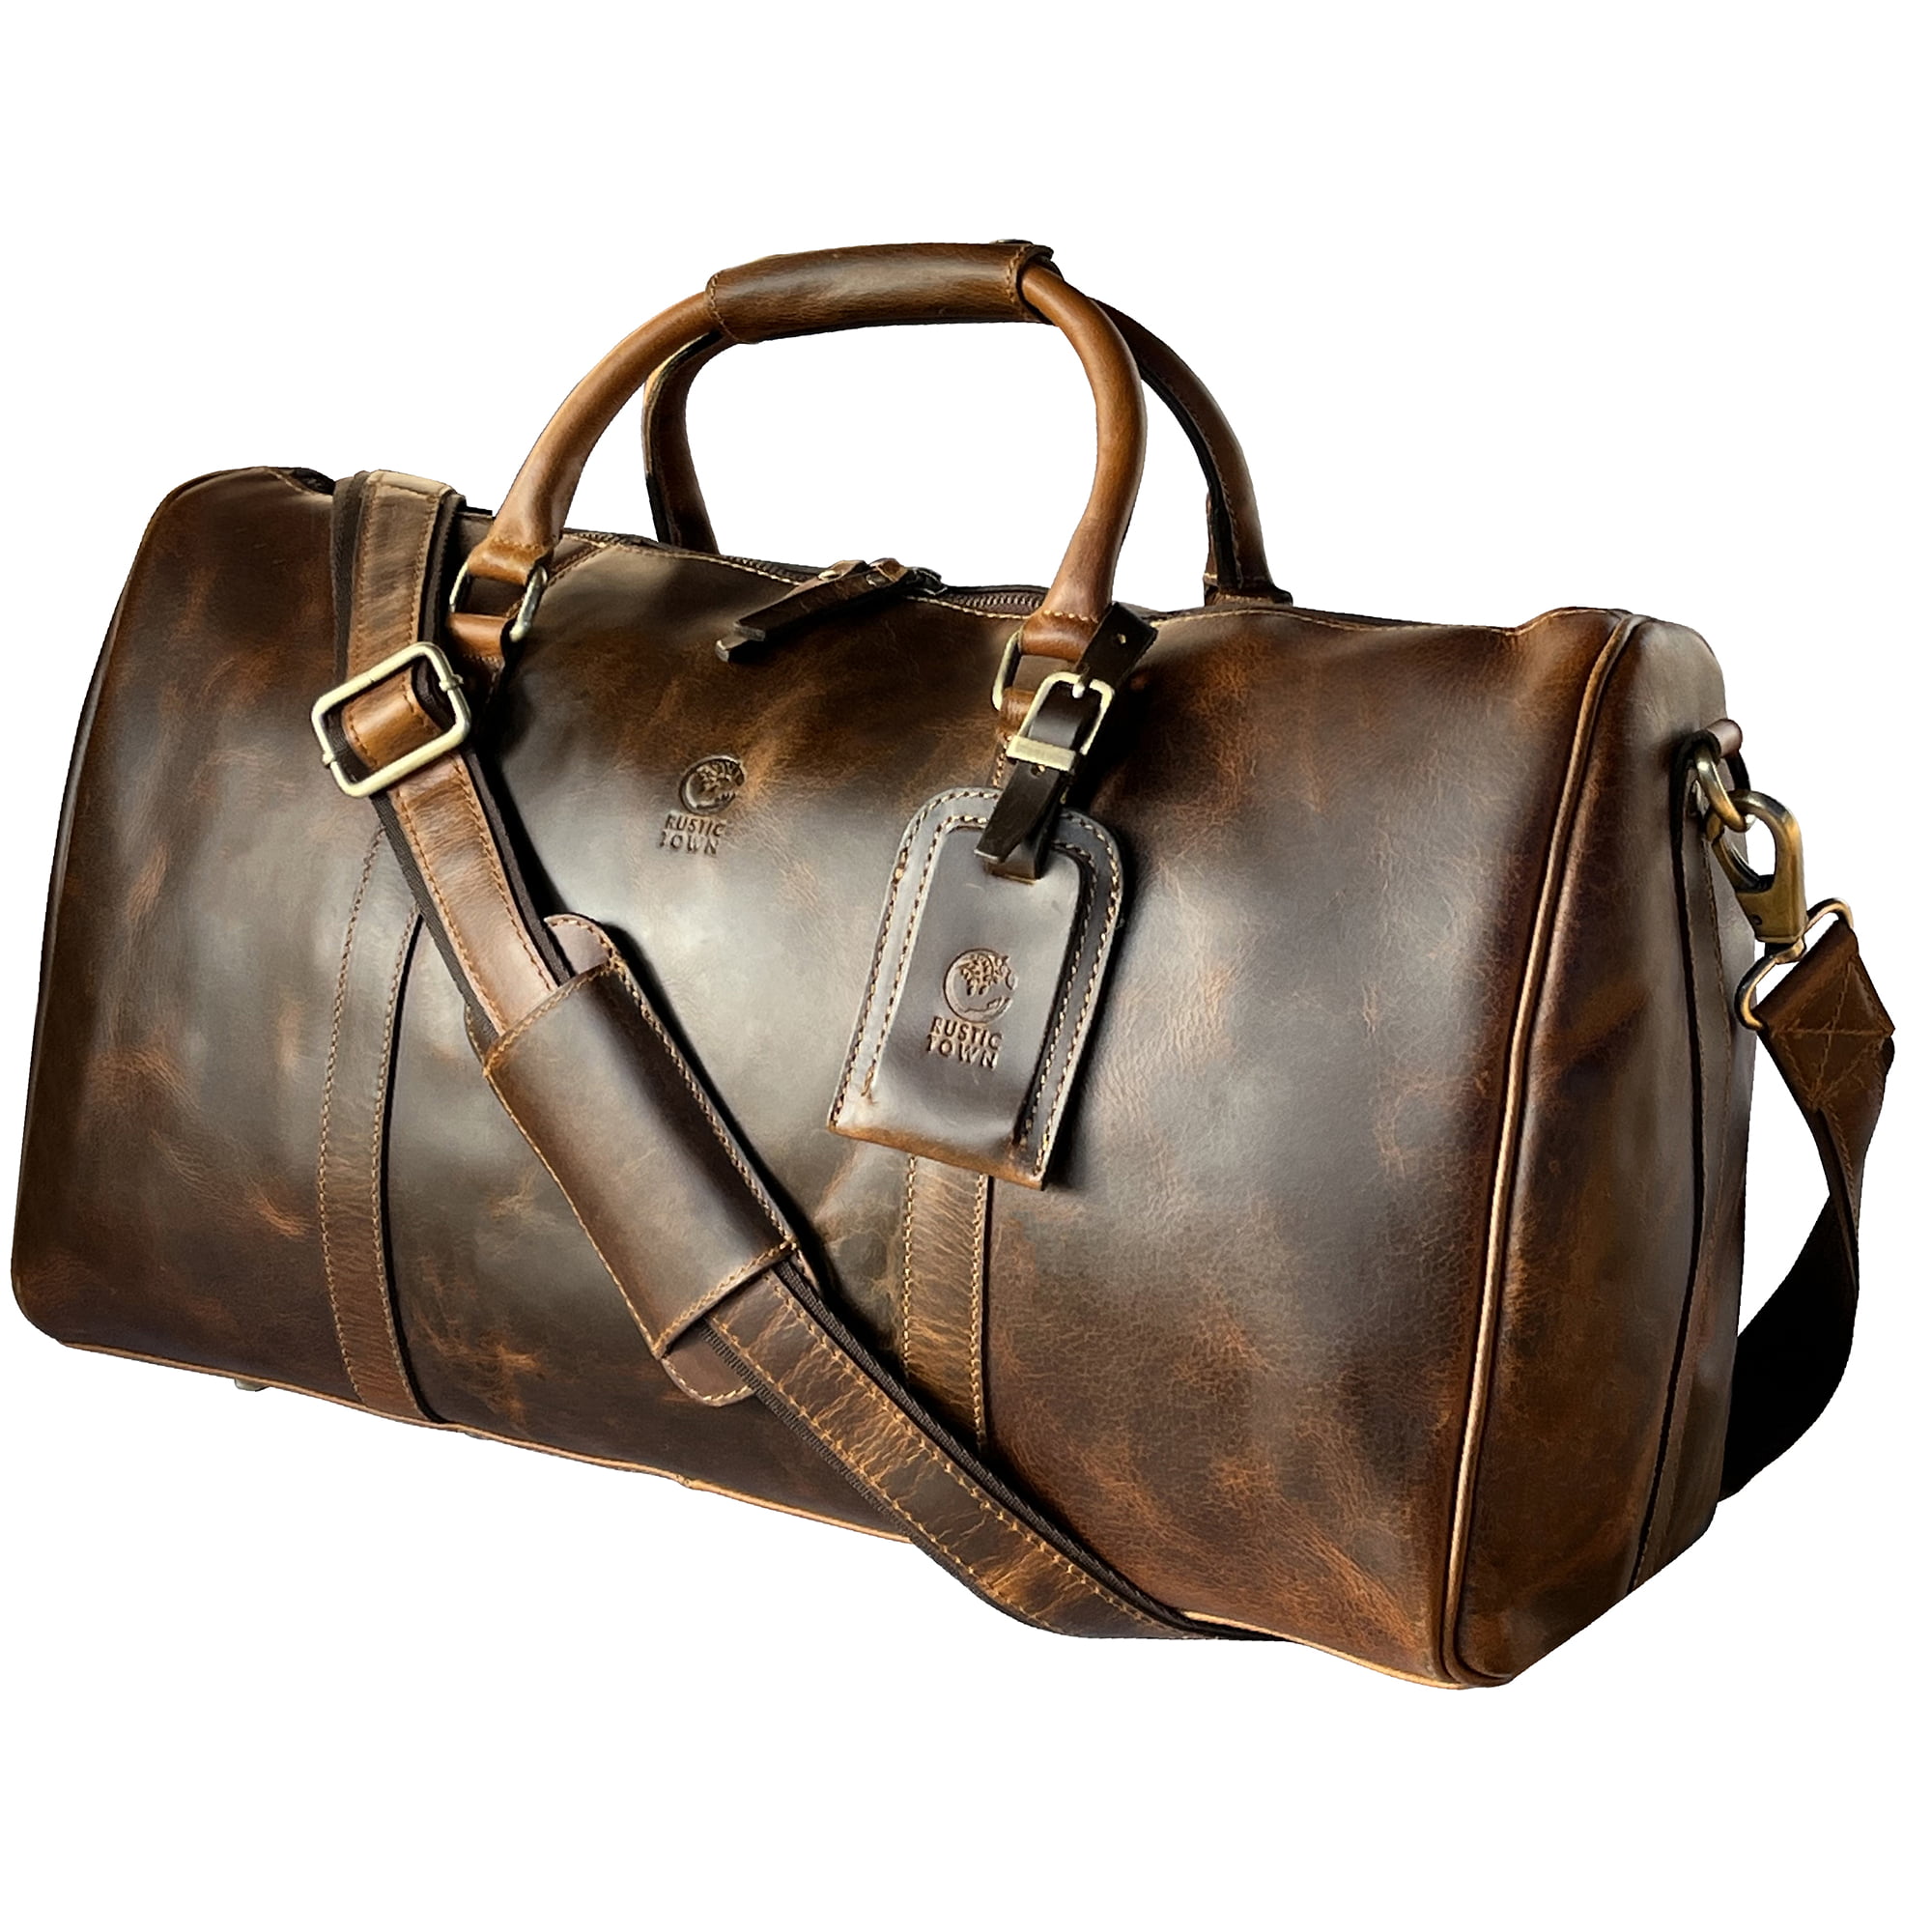 Weekender Duffle Bag - Vintage Leather Overnight Luggage in Two